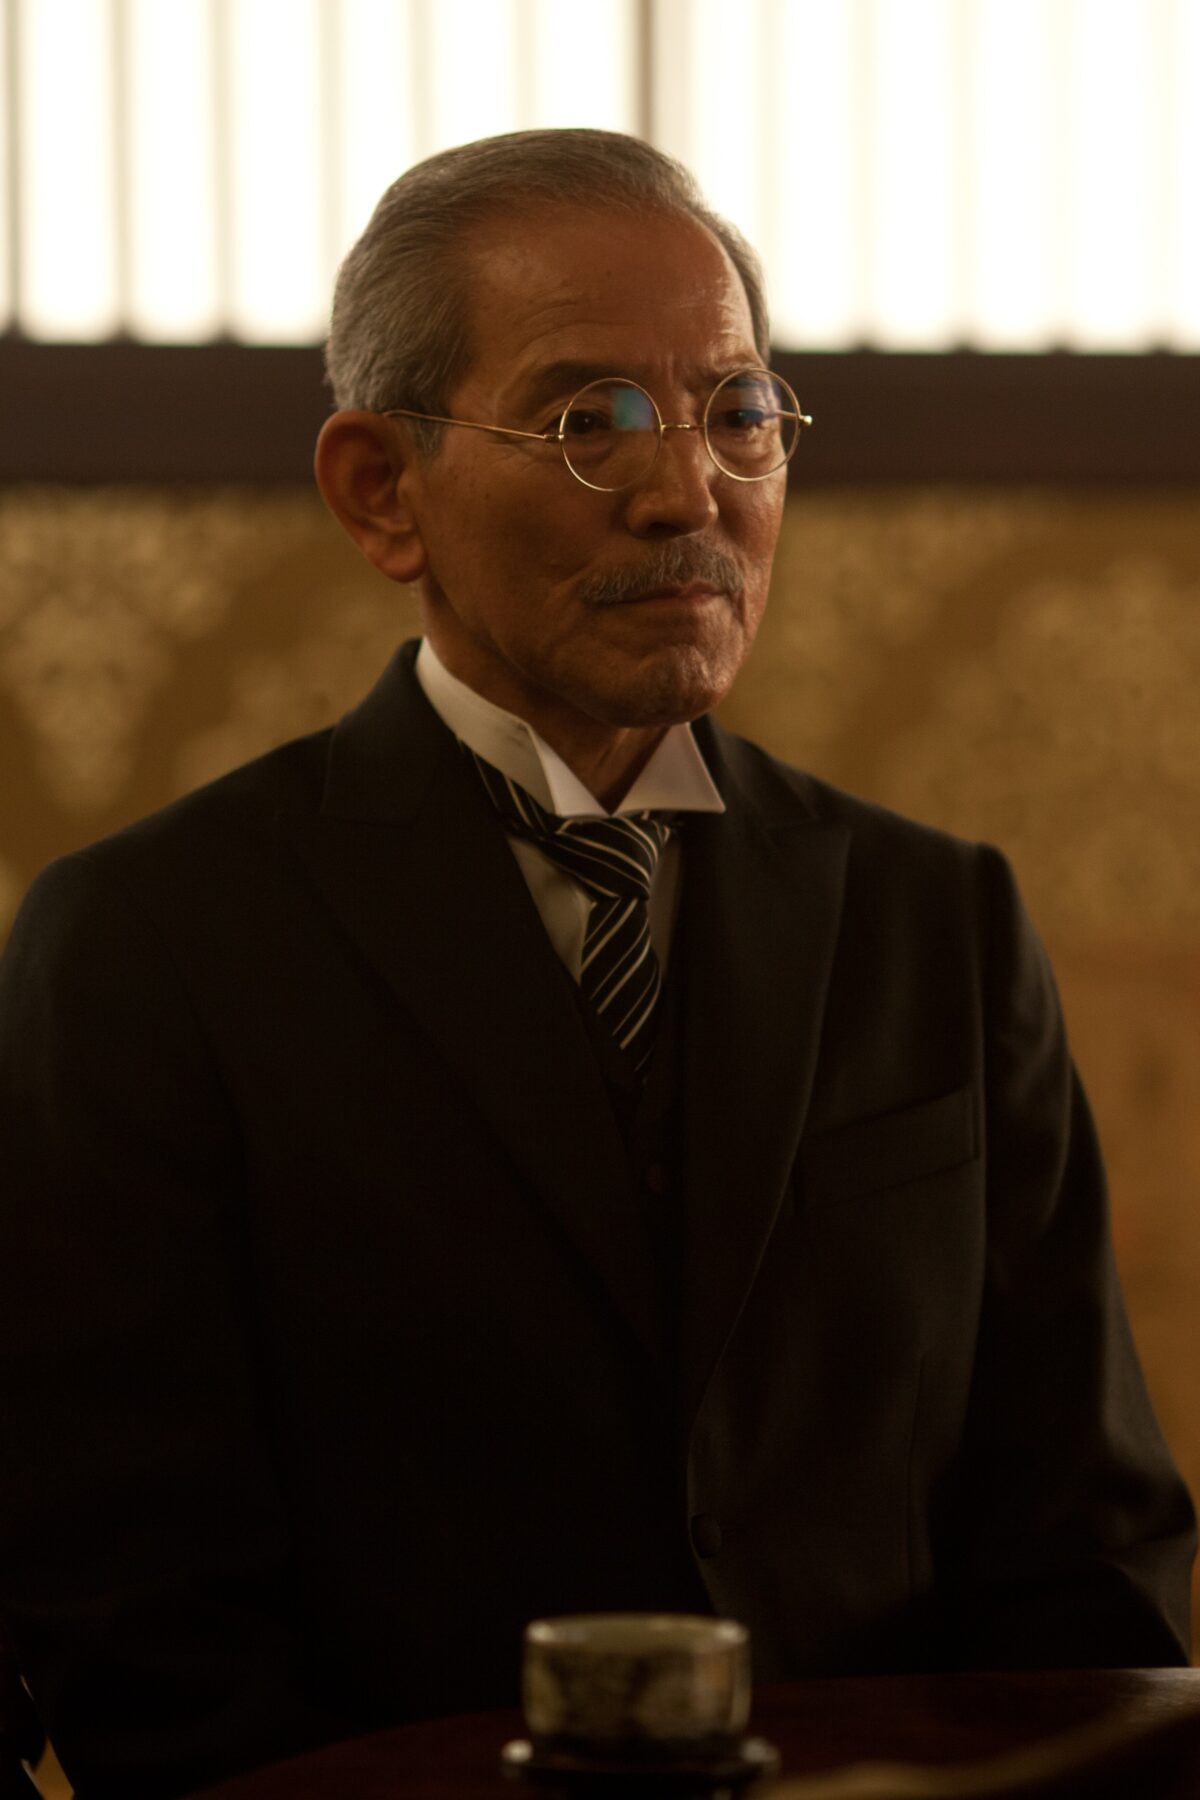 man with dark suit and glasses in EMPEROR